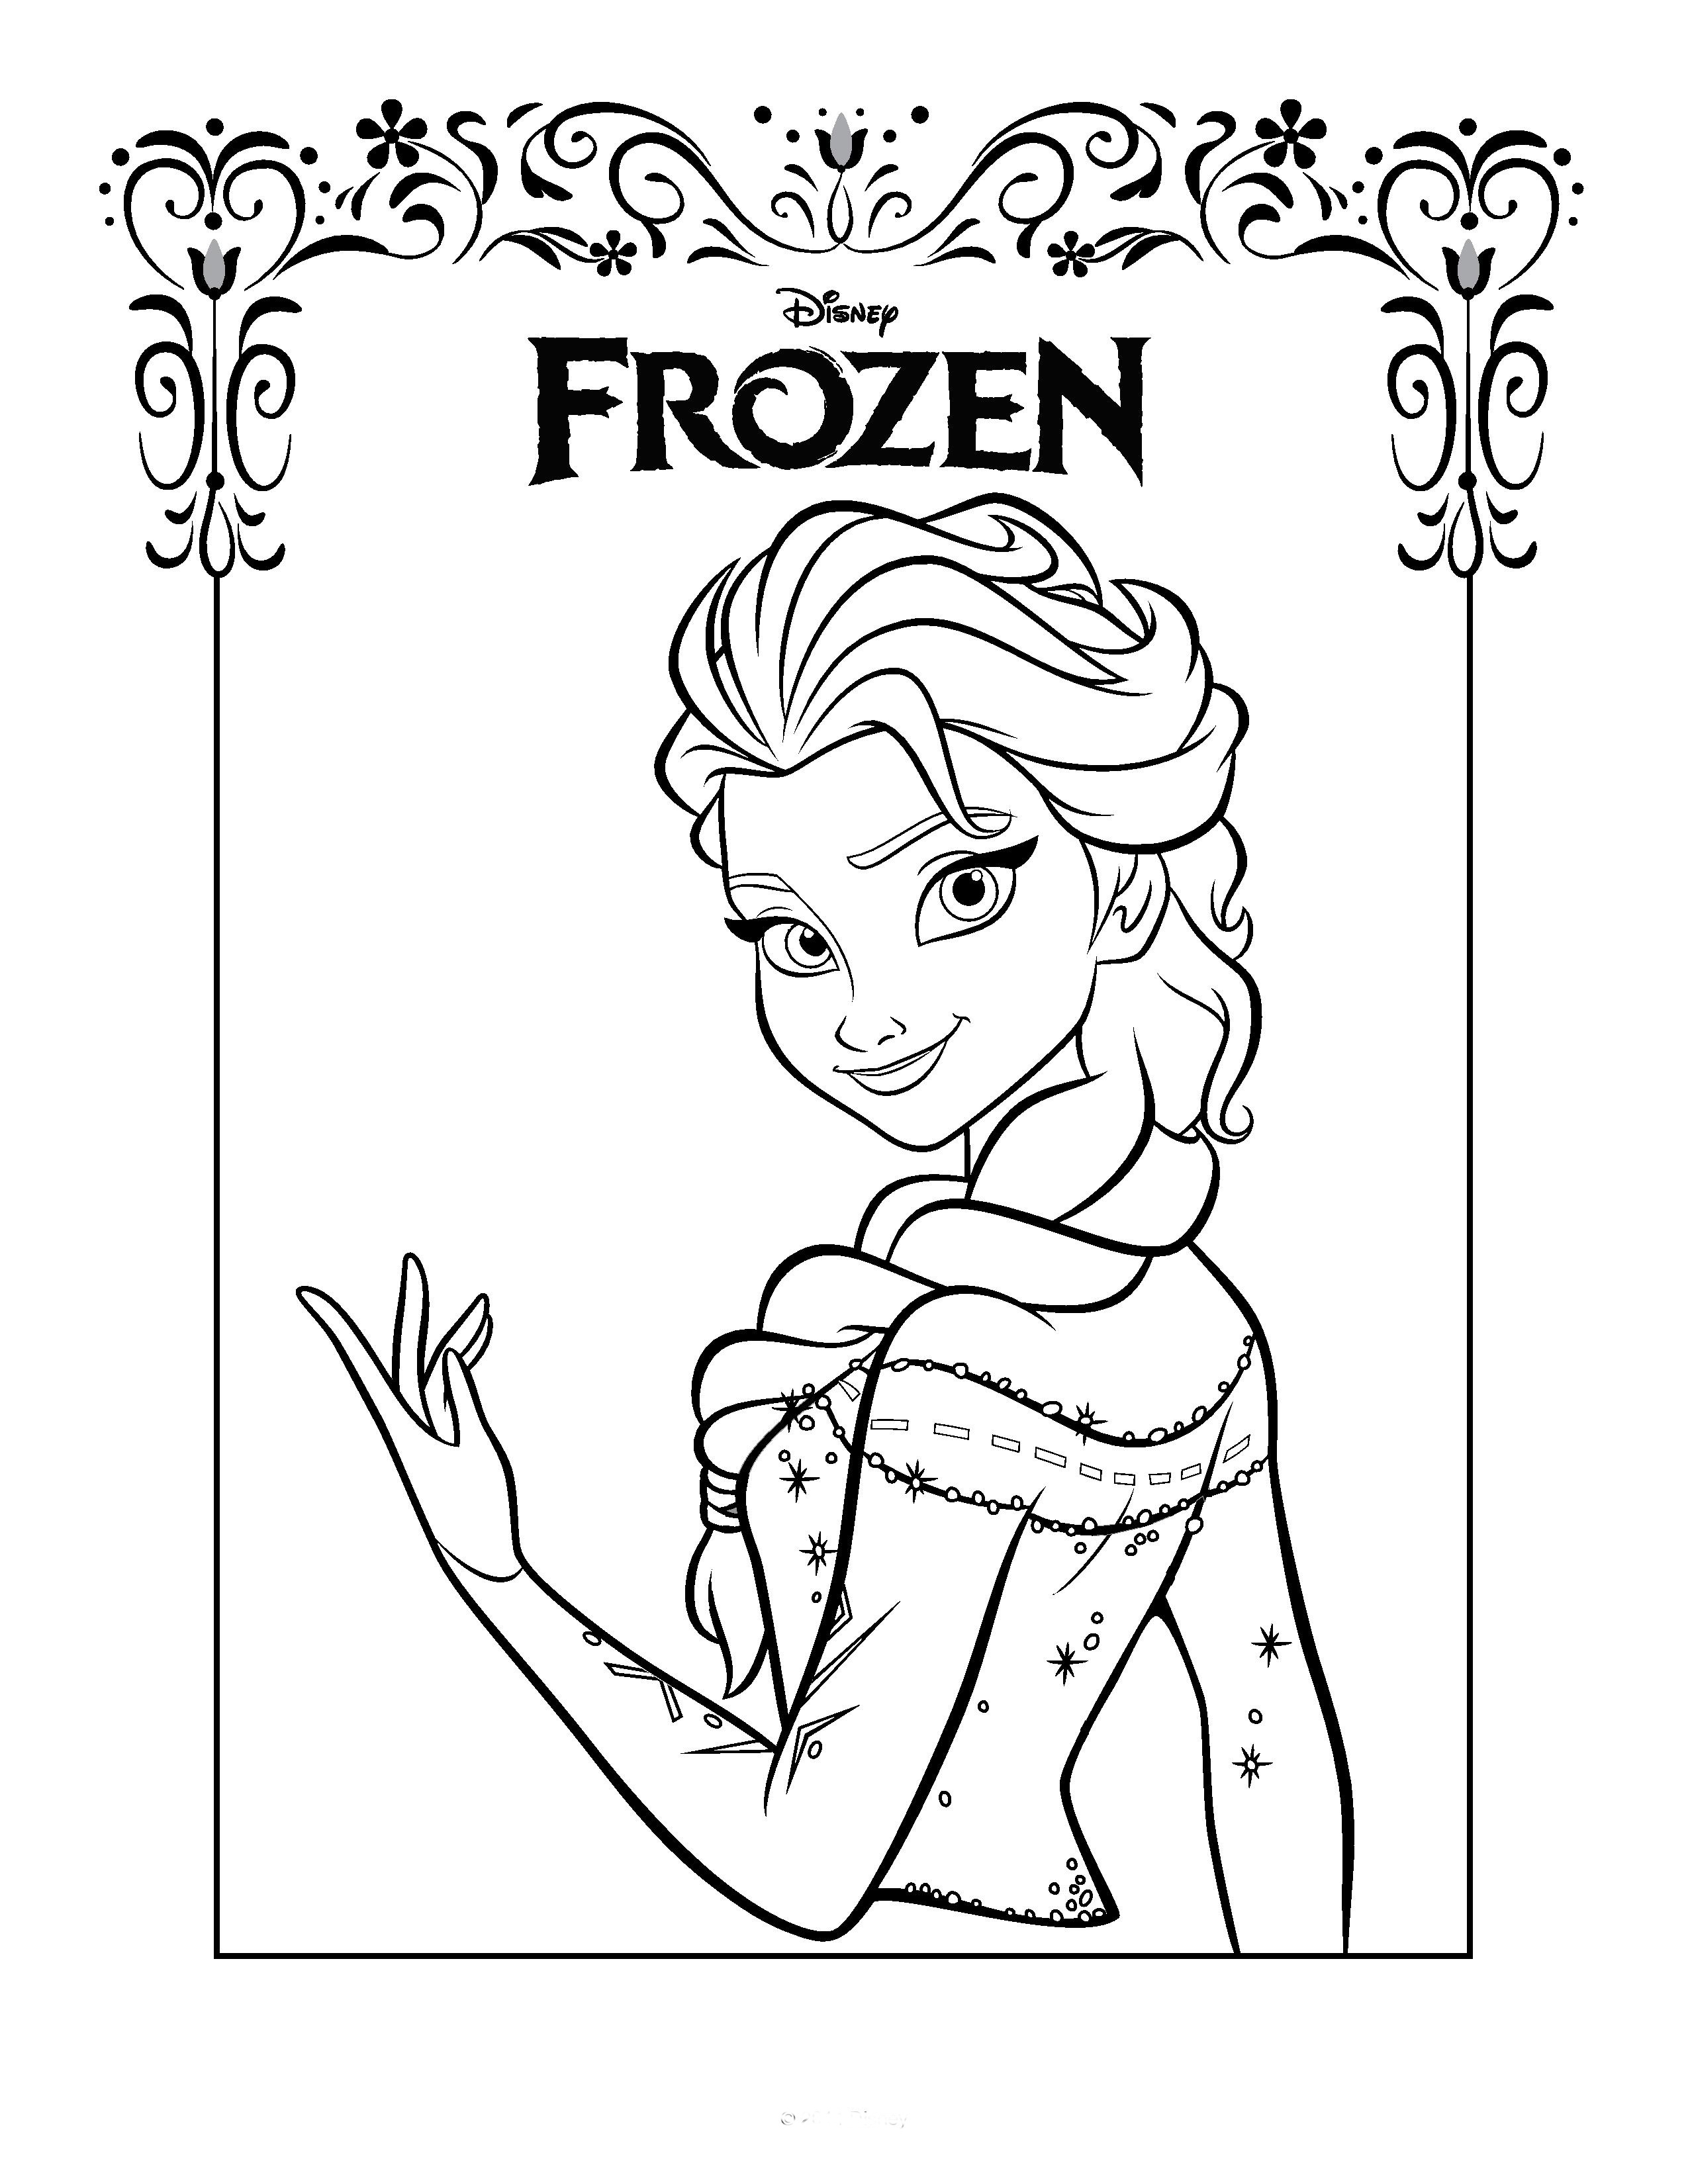 Coloring Pages : Printableoloring Pages Disney Frozenhart And World - Free Printable Coloring Pages Disney Frozen